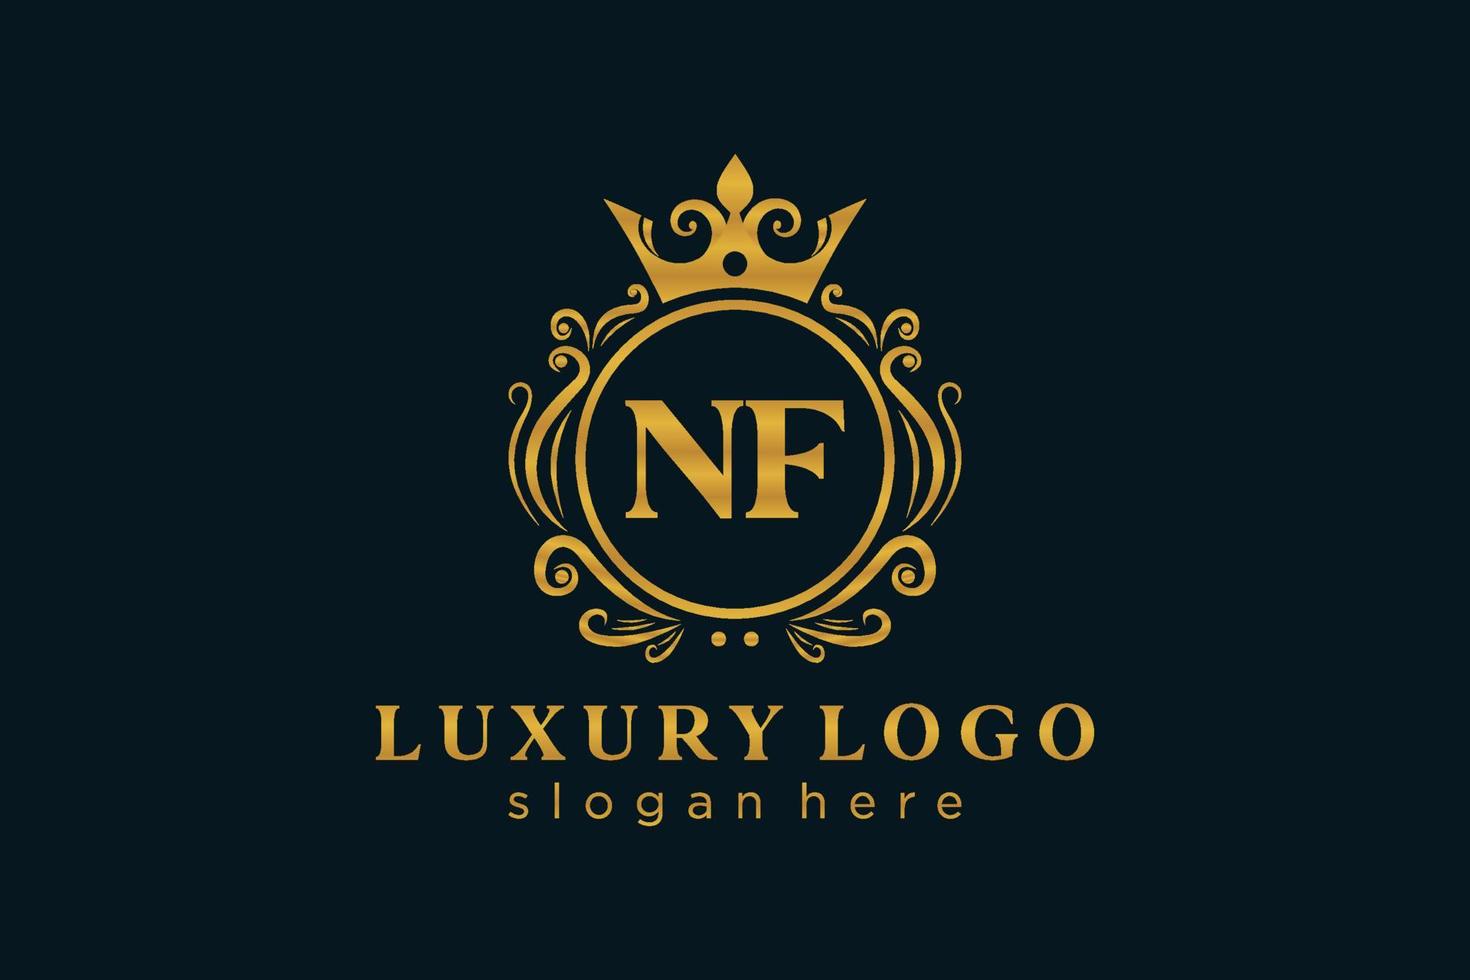 Initial NF Letter Royal Luxury Logo template in vector art for Restaurant, Royalty, Boutique, Cafe, Hotel, Heraldic, Jewelry, Fashion and other vector illustration.